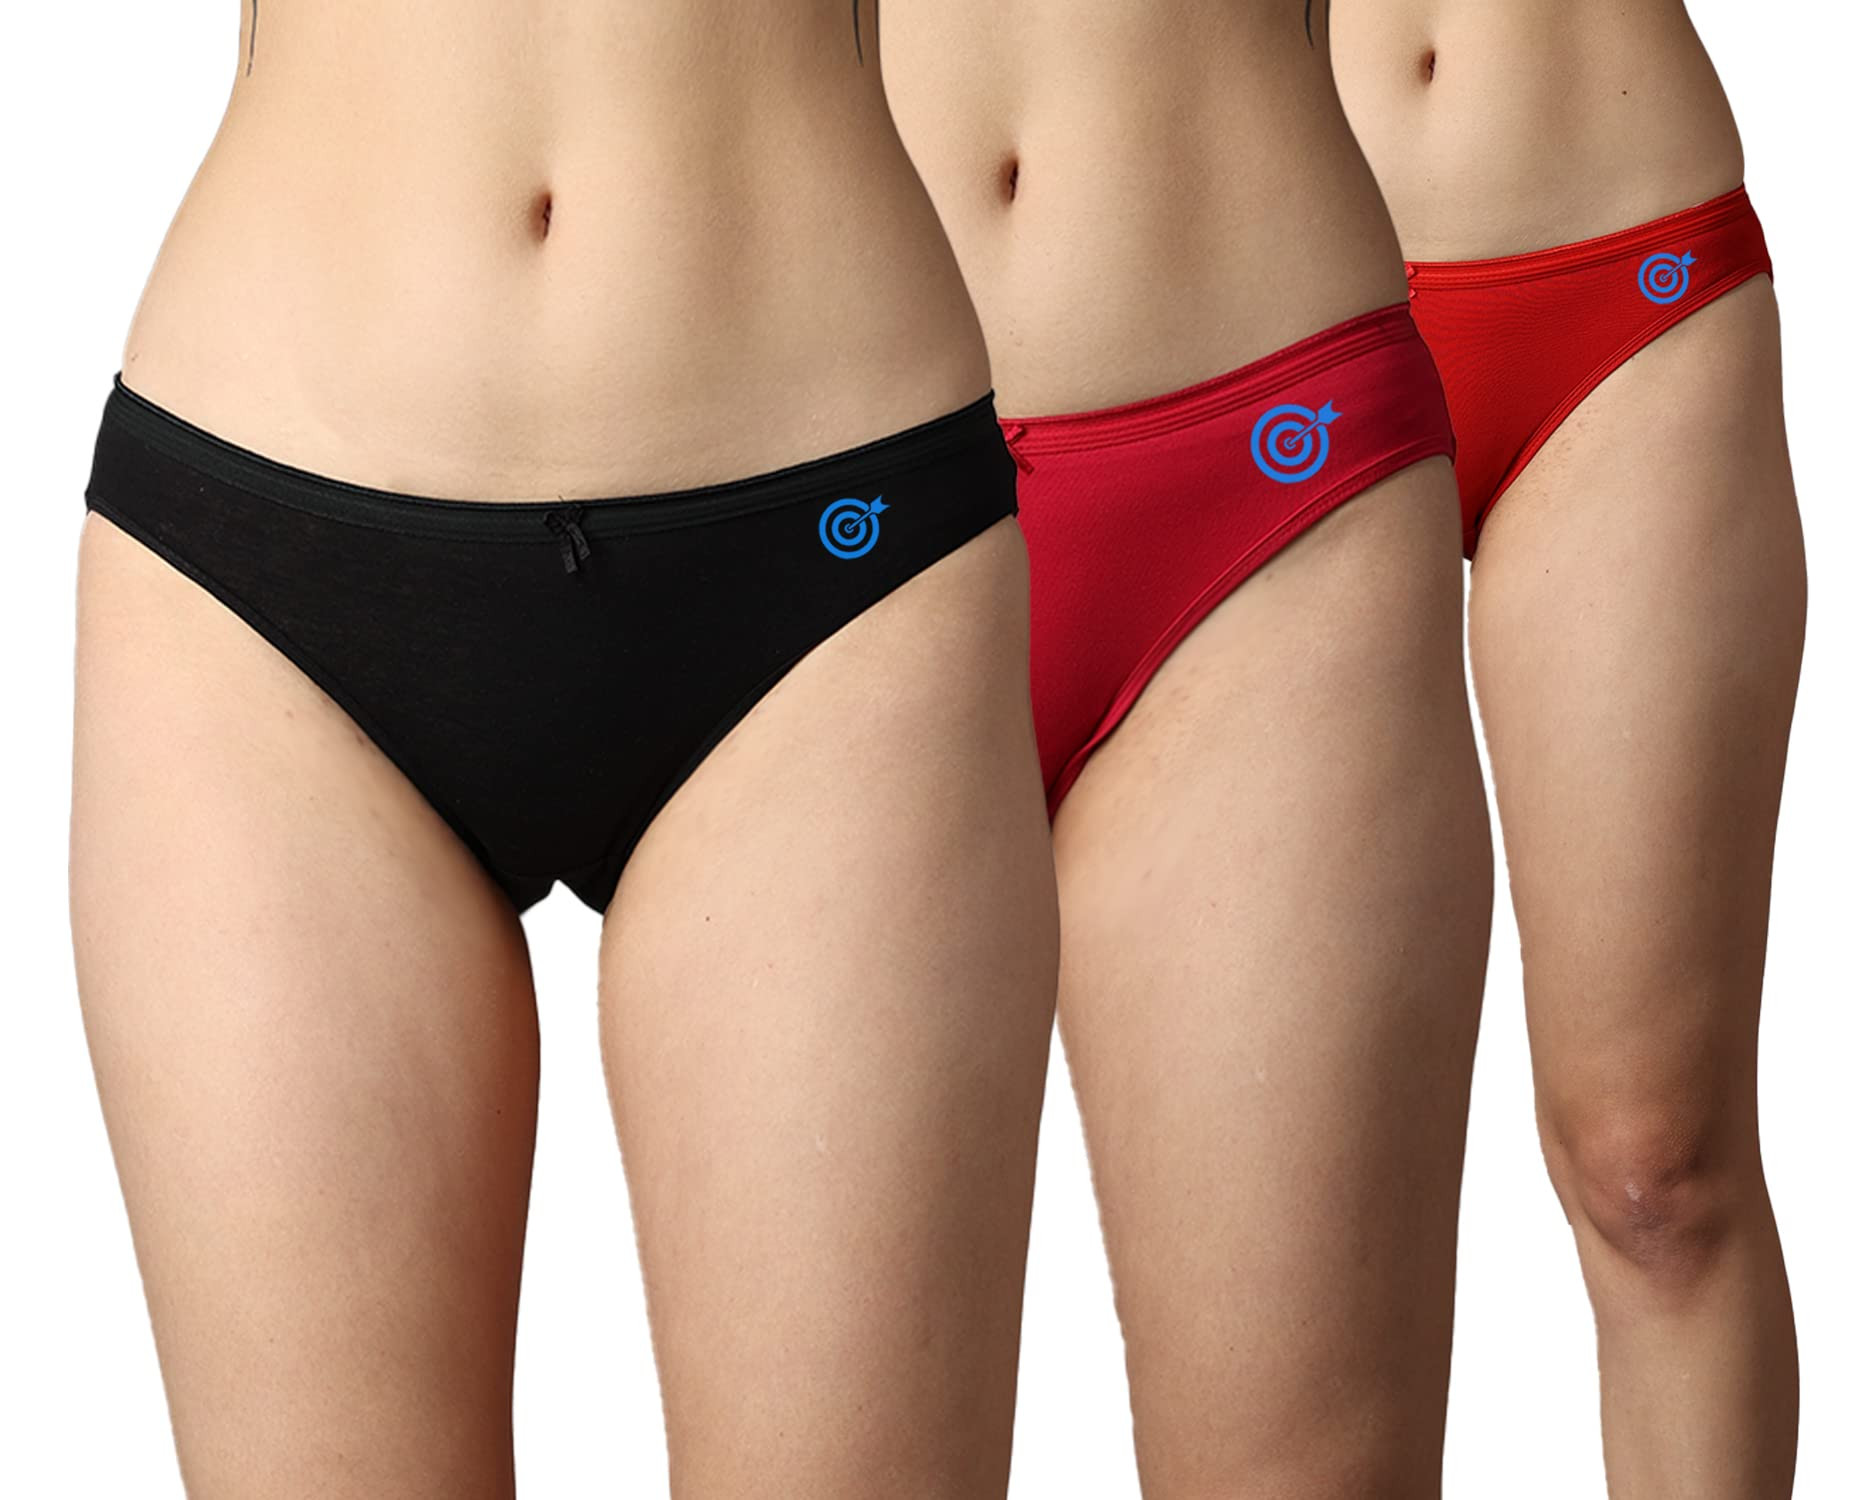 https://www.fastemi.com/uploads/fastemicom/products/wearslim-premium-soft-and-comfortable-cotton-bikini-no-show-panty-invisible-breathable-briefs-soft-stretch-hipster-underwear-pack-of-threesize-2xl-268158641504668_l.jpg